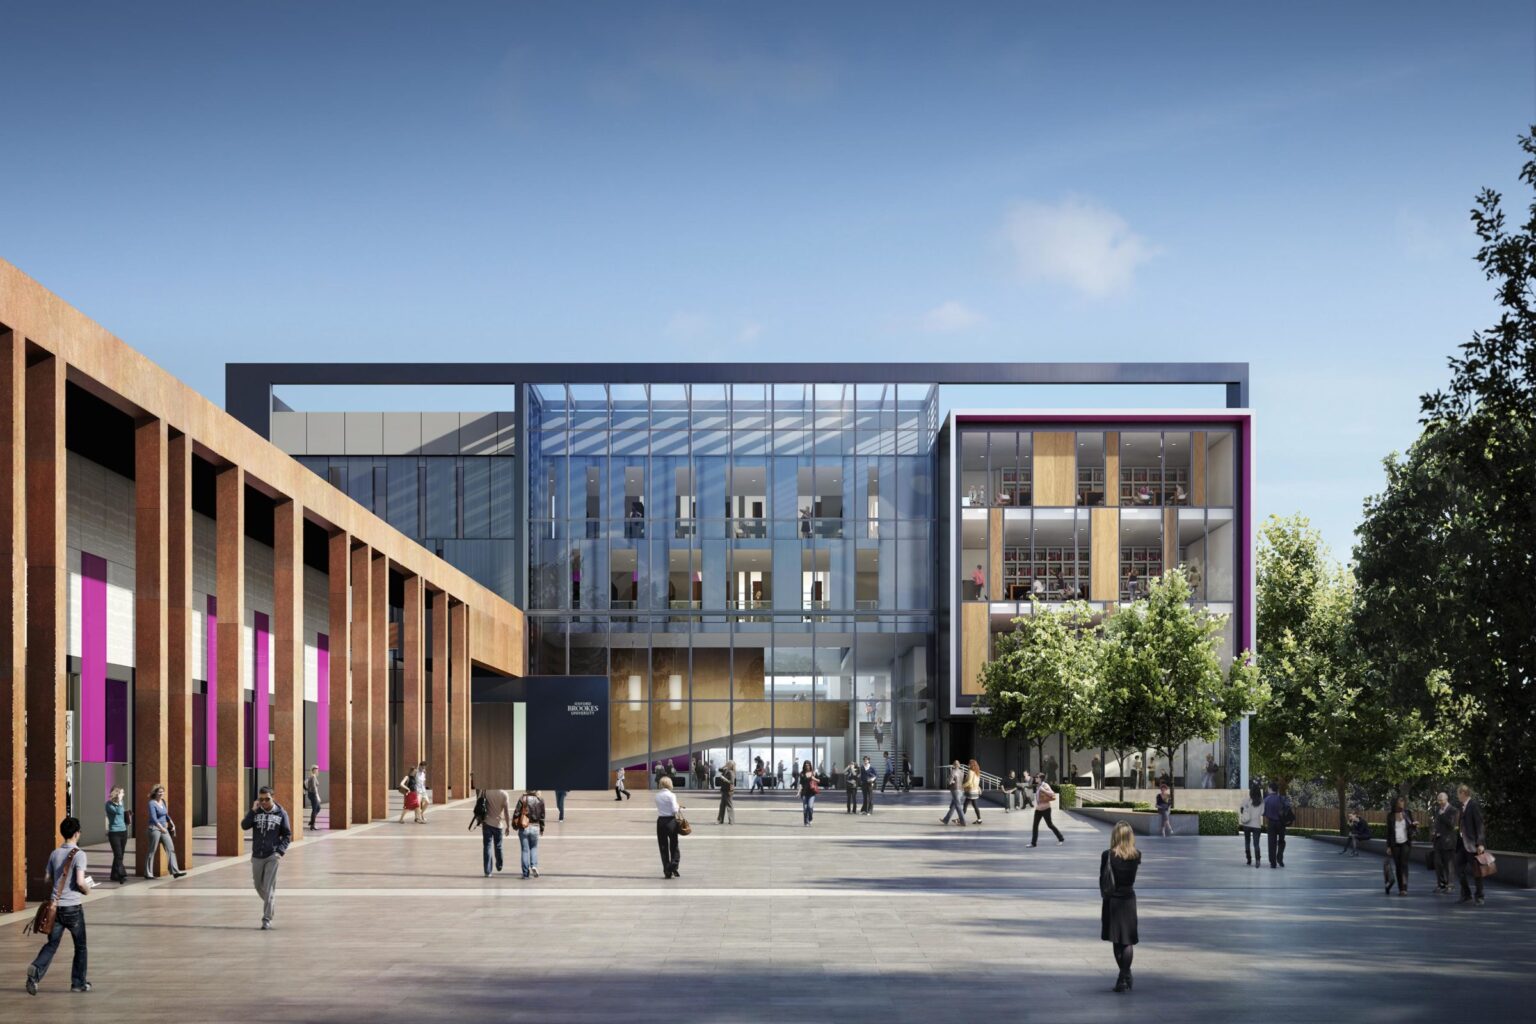 Oxford Brookes University moves closer to starting on site Design